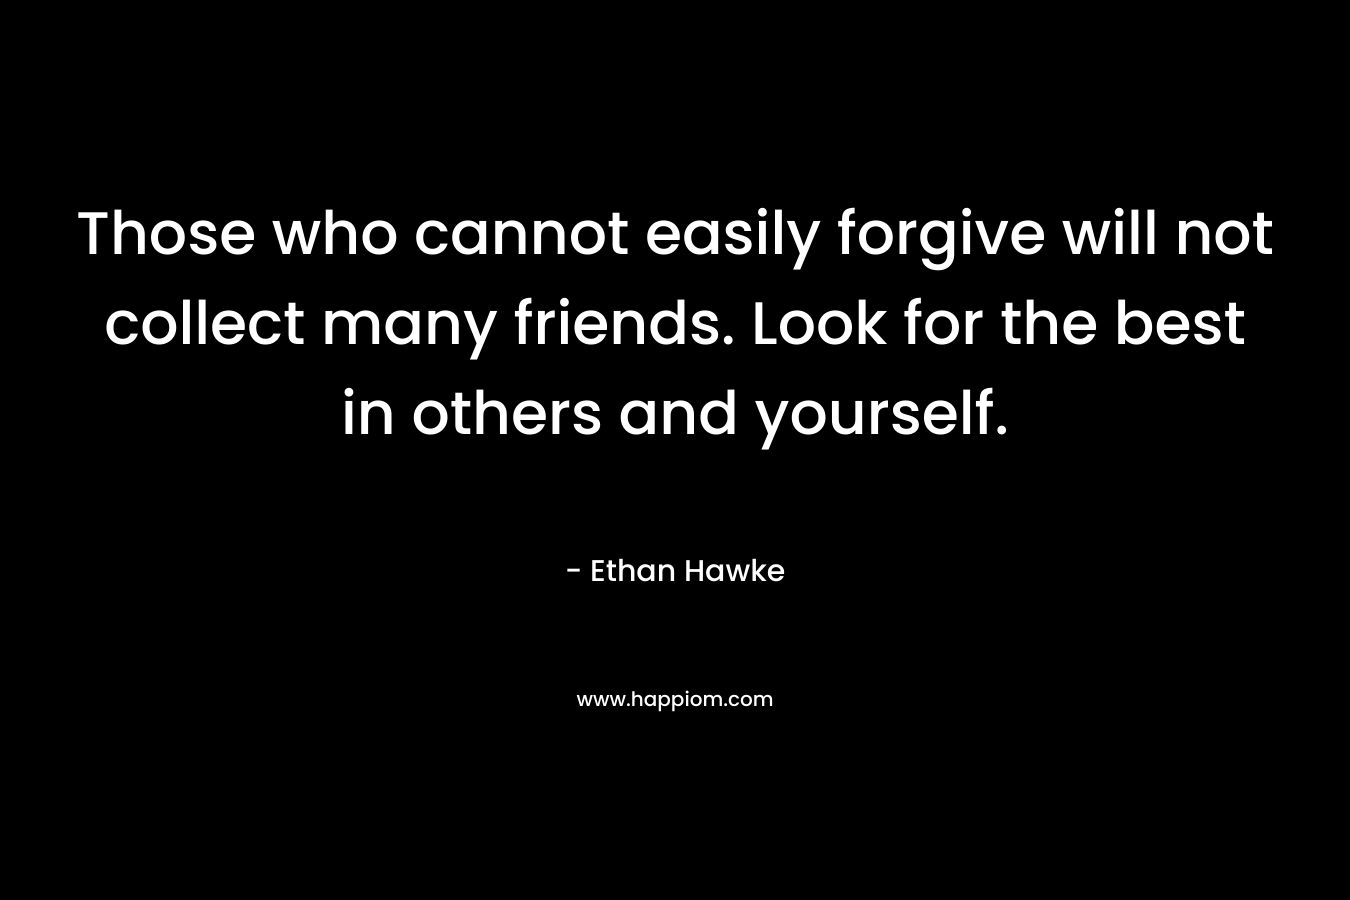 Those who cannot easily forgive will not collect many friends. Look for the best in others and yourself.